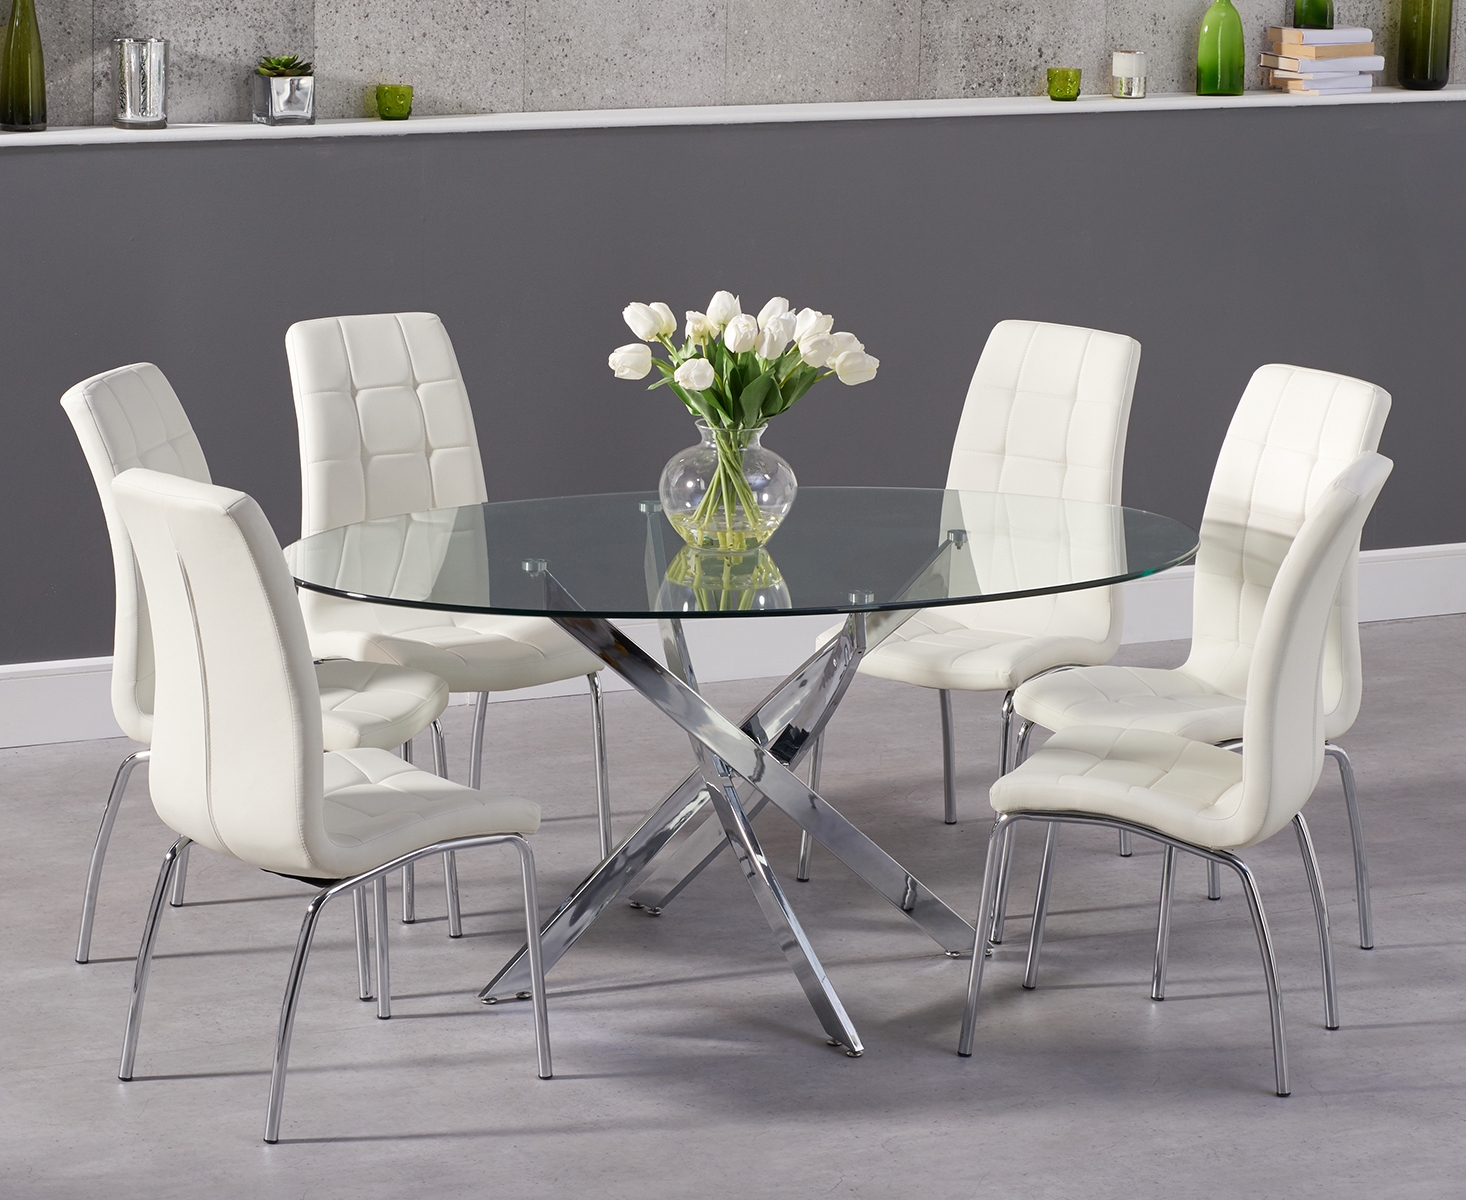 Denver 165cm Oval Glass Dining Table With 6 Black Enzo Chairs